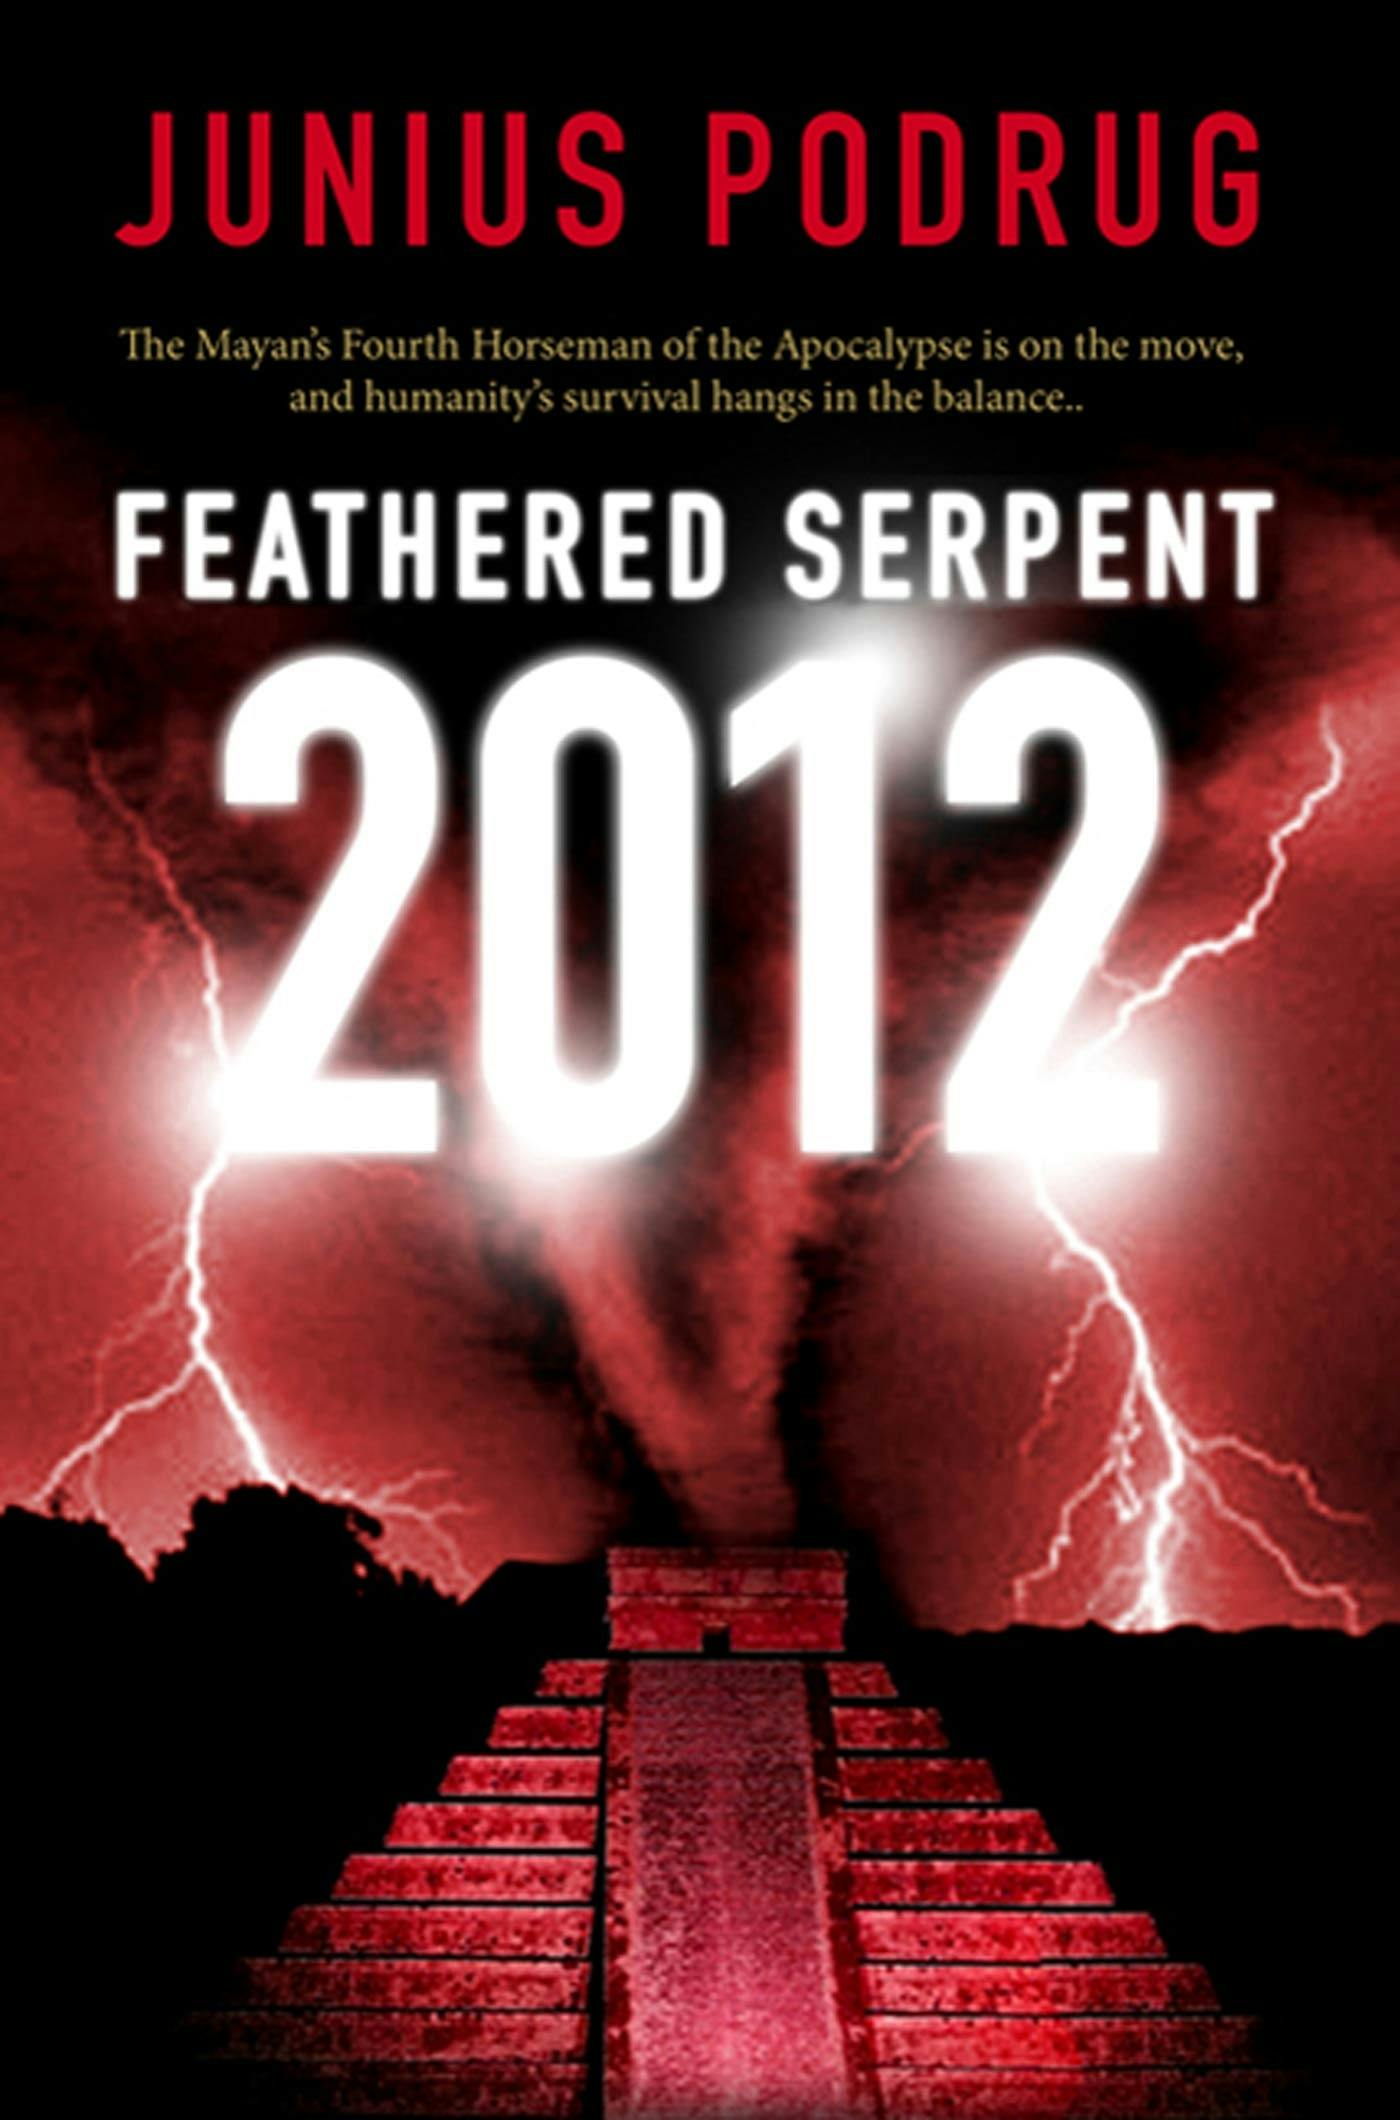 Cover for the book titled as: Feathered Serpent 2012